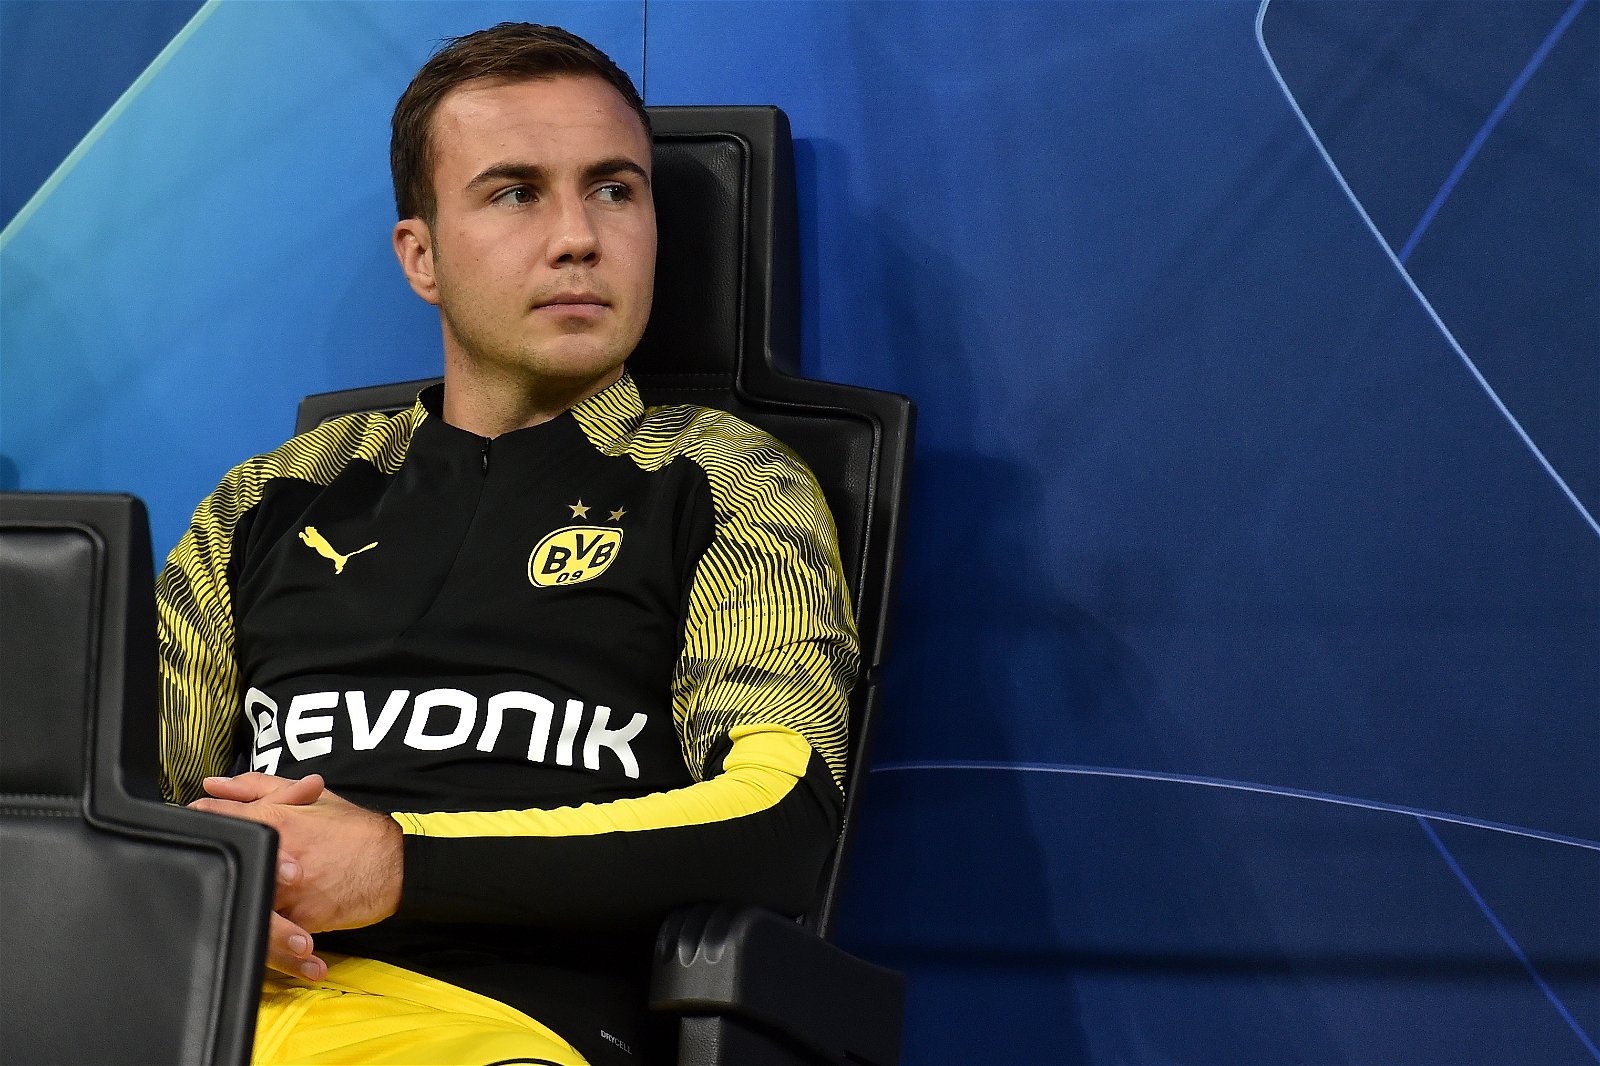 Forearm fracture not stopping Mario Gotze from playing for Borussia Dortmund